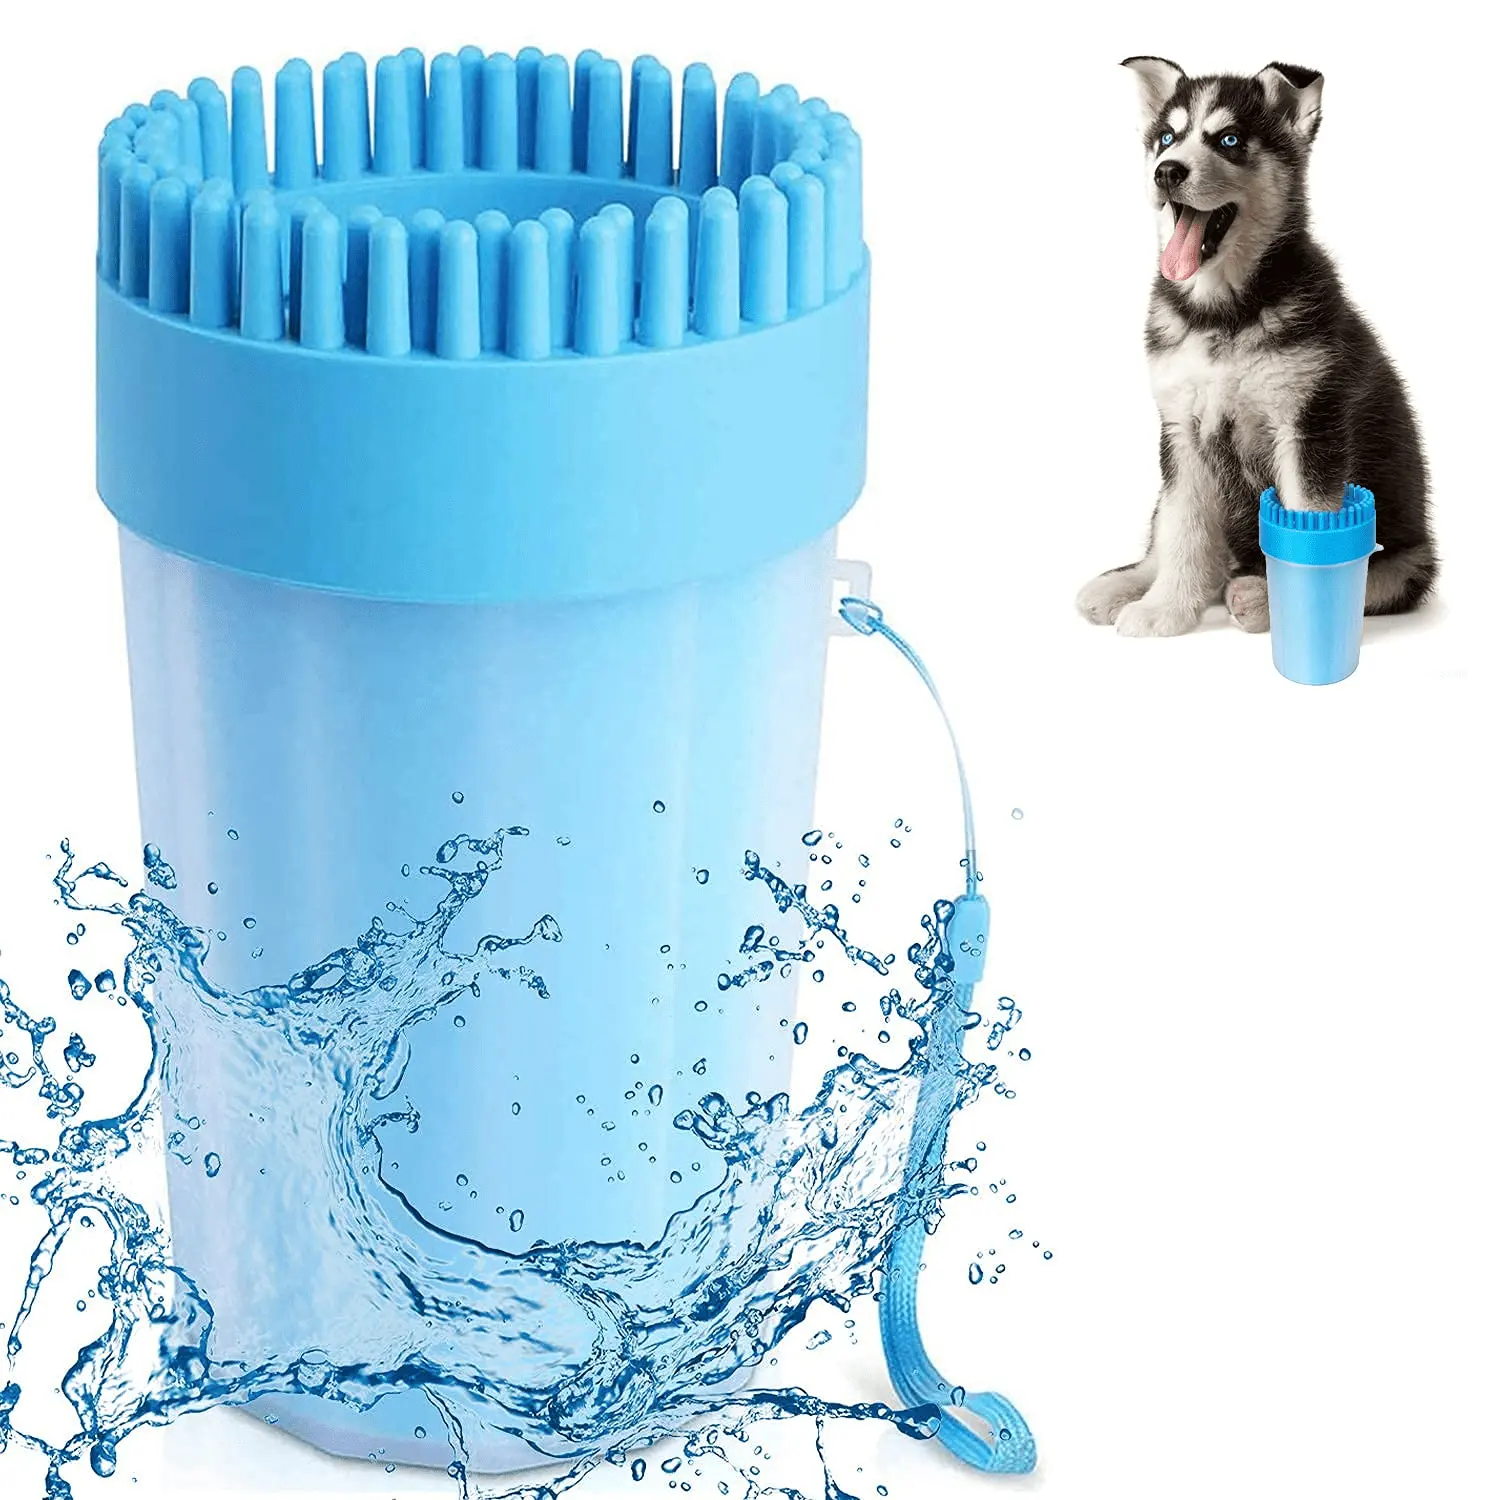 Hot Sales Portable Silicone Pet Foot Washing Cup For Dogs Grooming With Muddy Paw